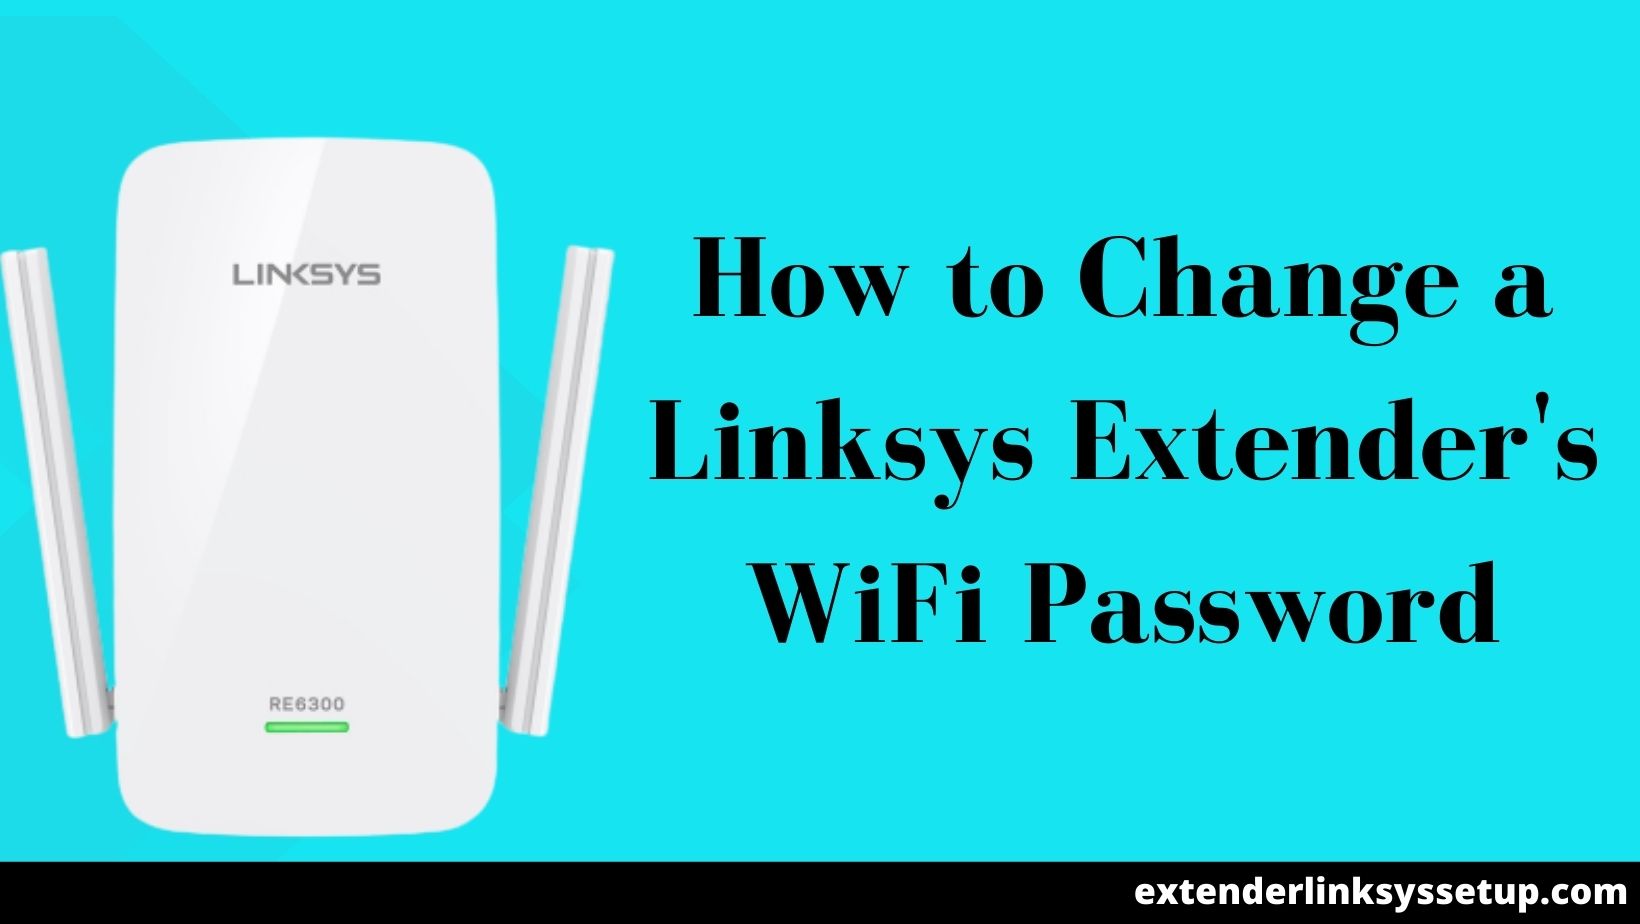 How to Change a Linksys Extender's WiFi Password